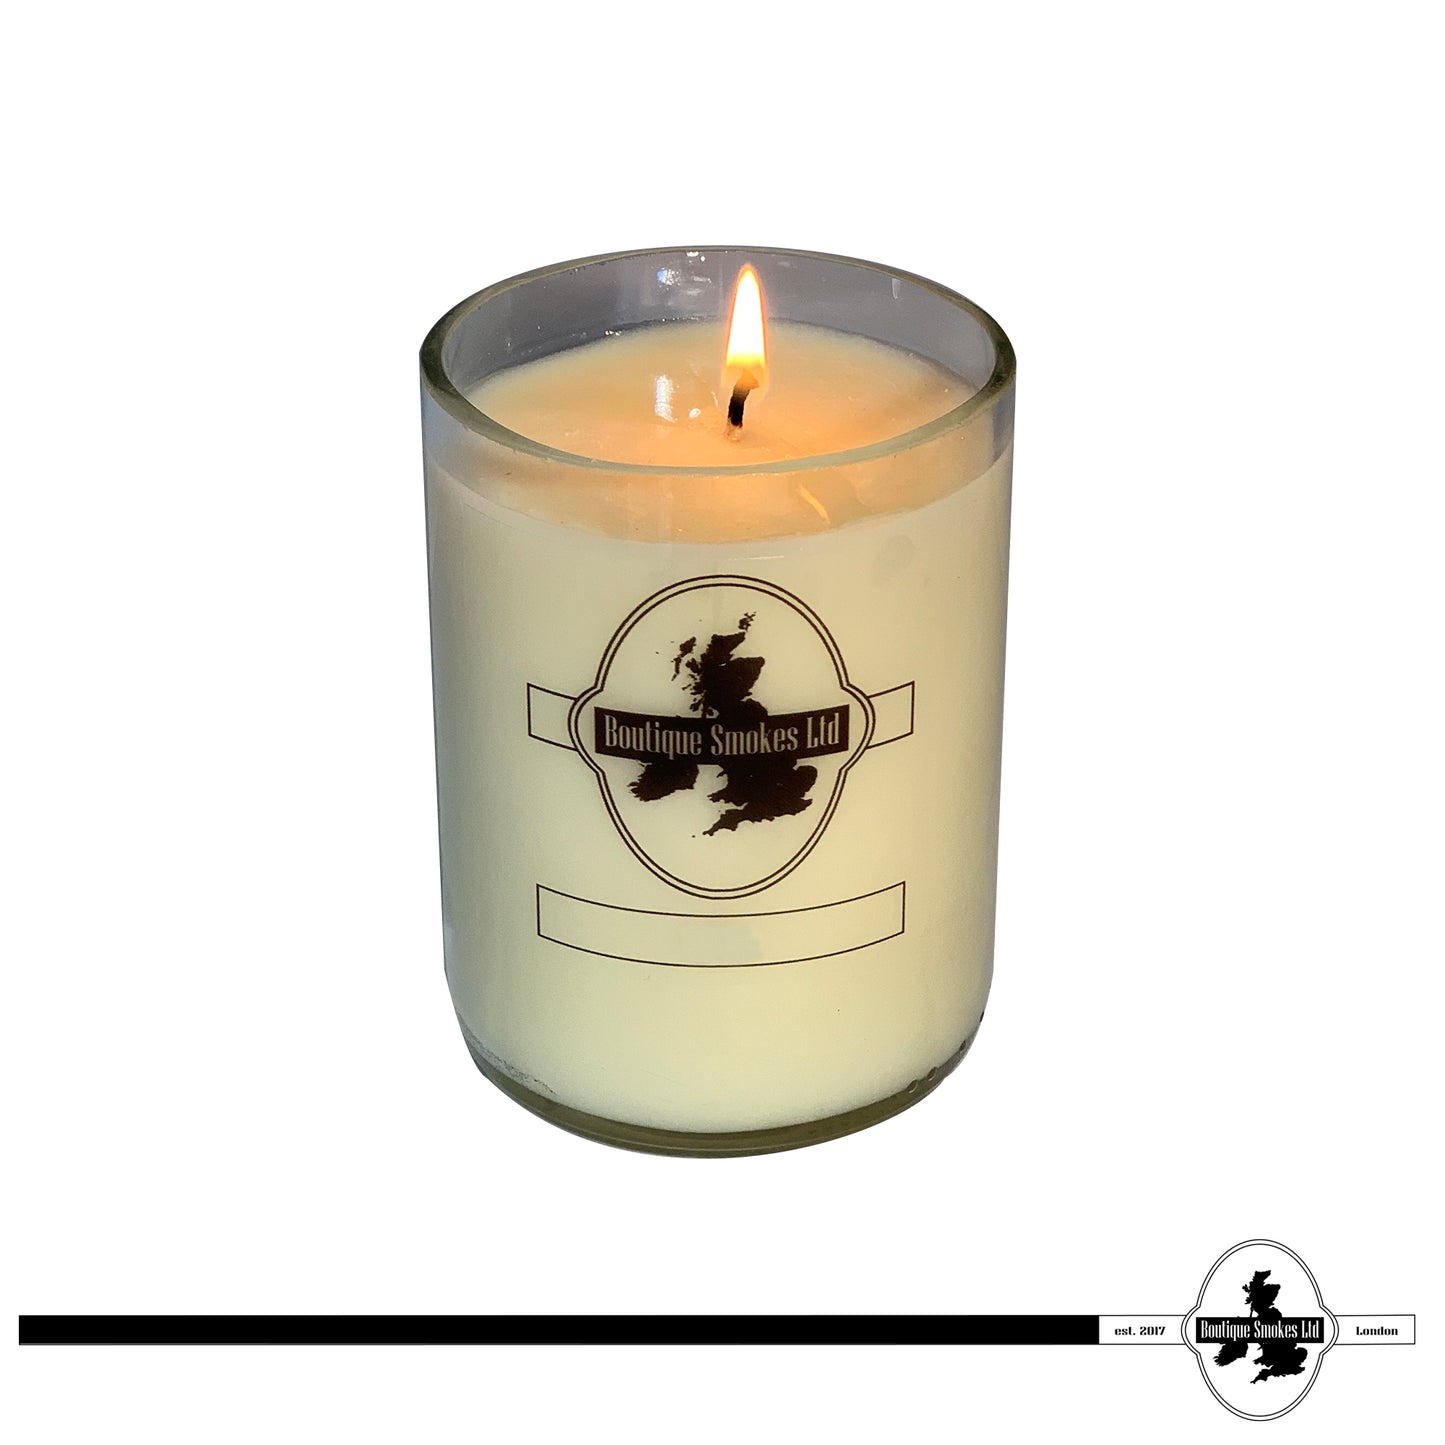 Tobacco & Oak Smoking Candle by Half-Cut Candles